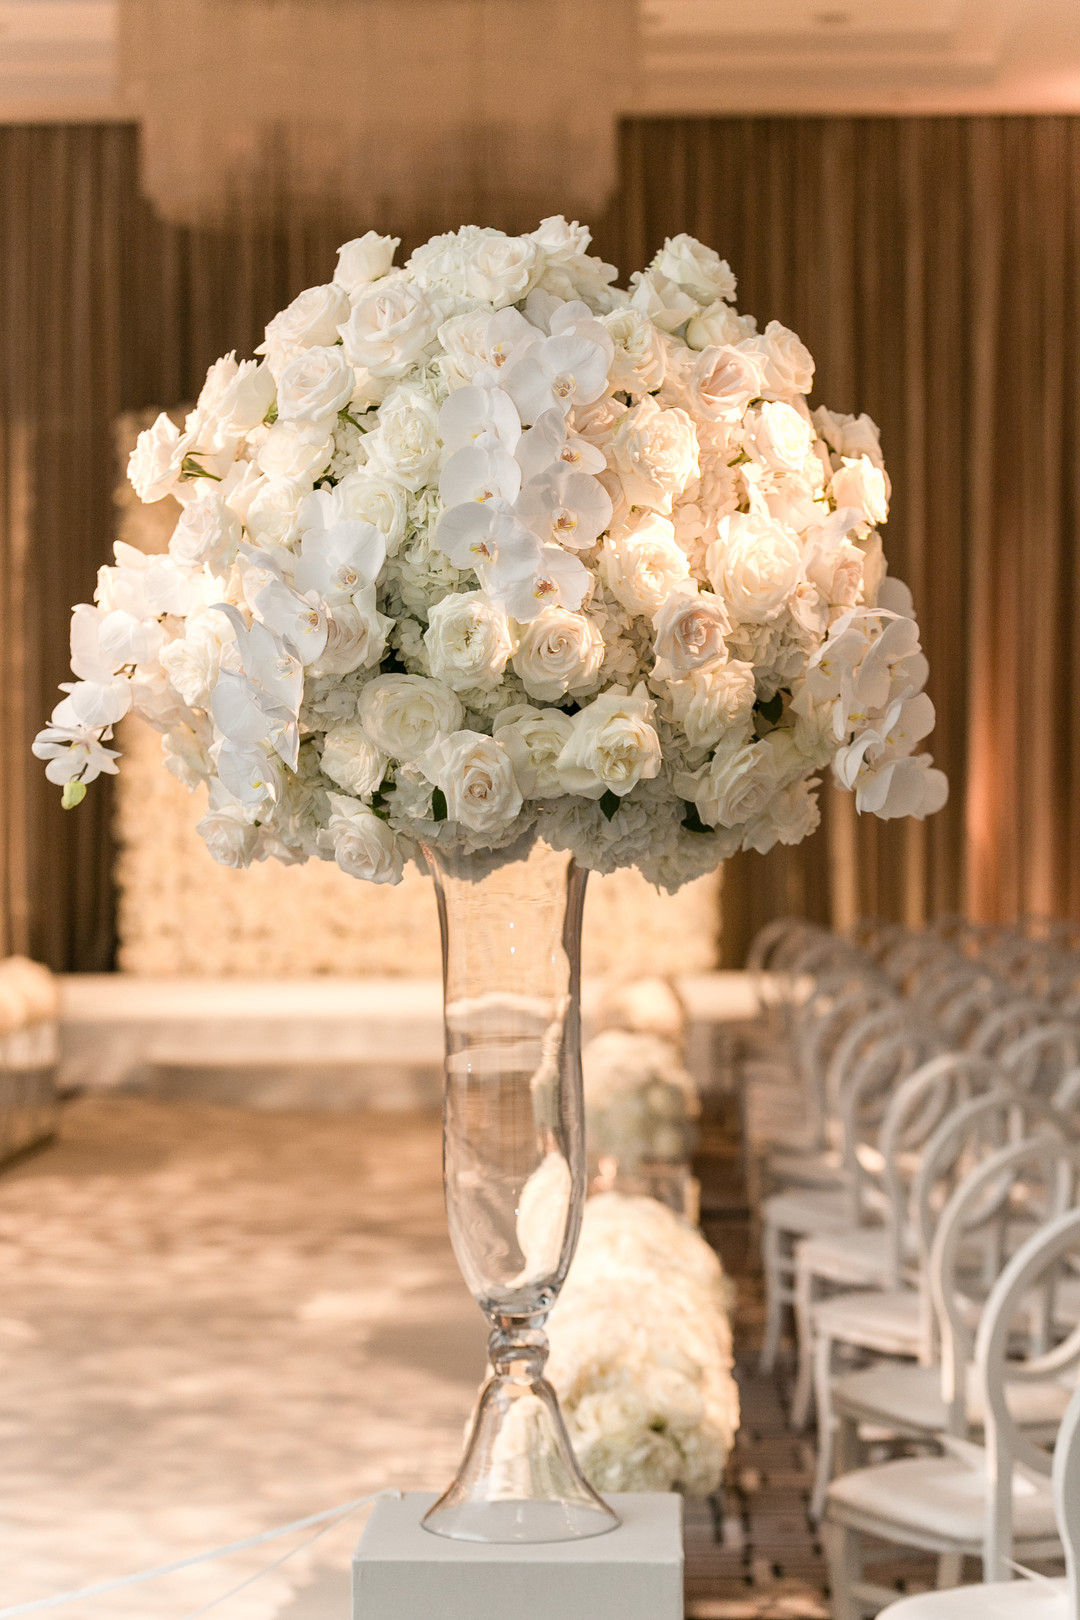 Glamorous and elegant all-white winter Chicago wedding. Be inspired and find more wedding inspiration at CHItheeWED.com!